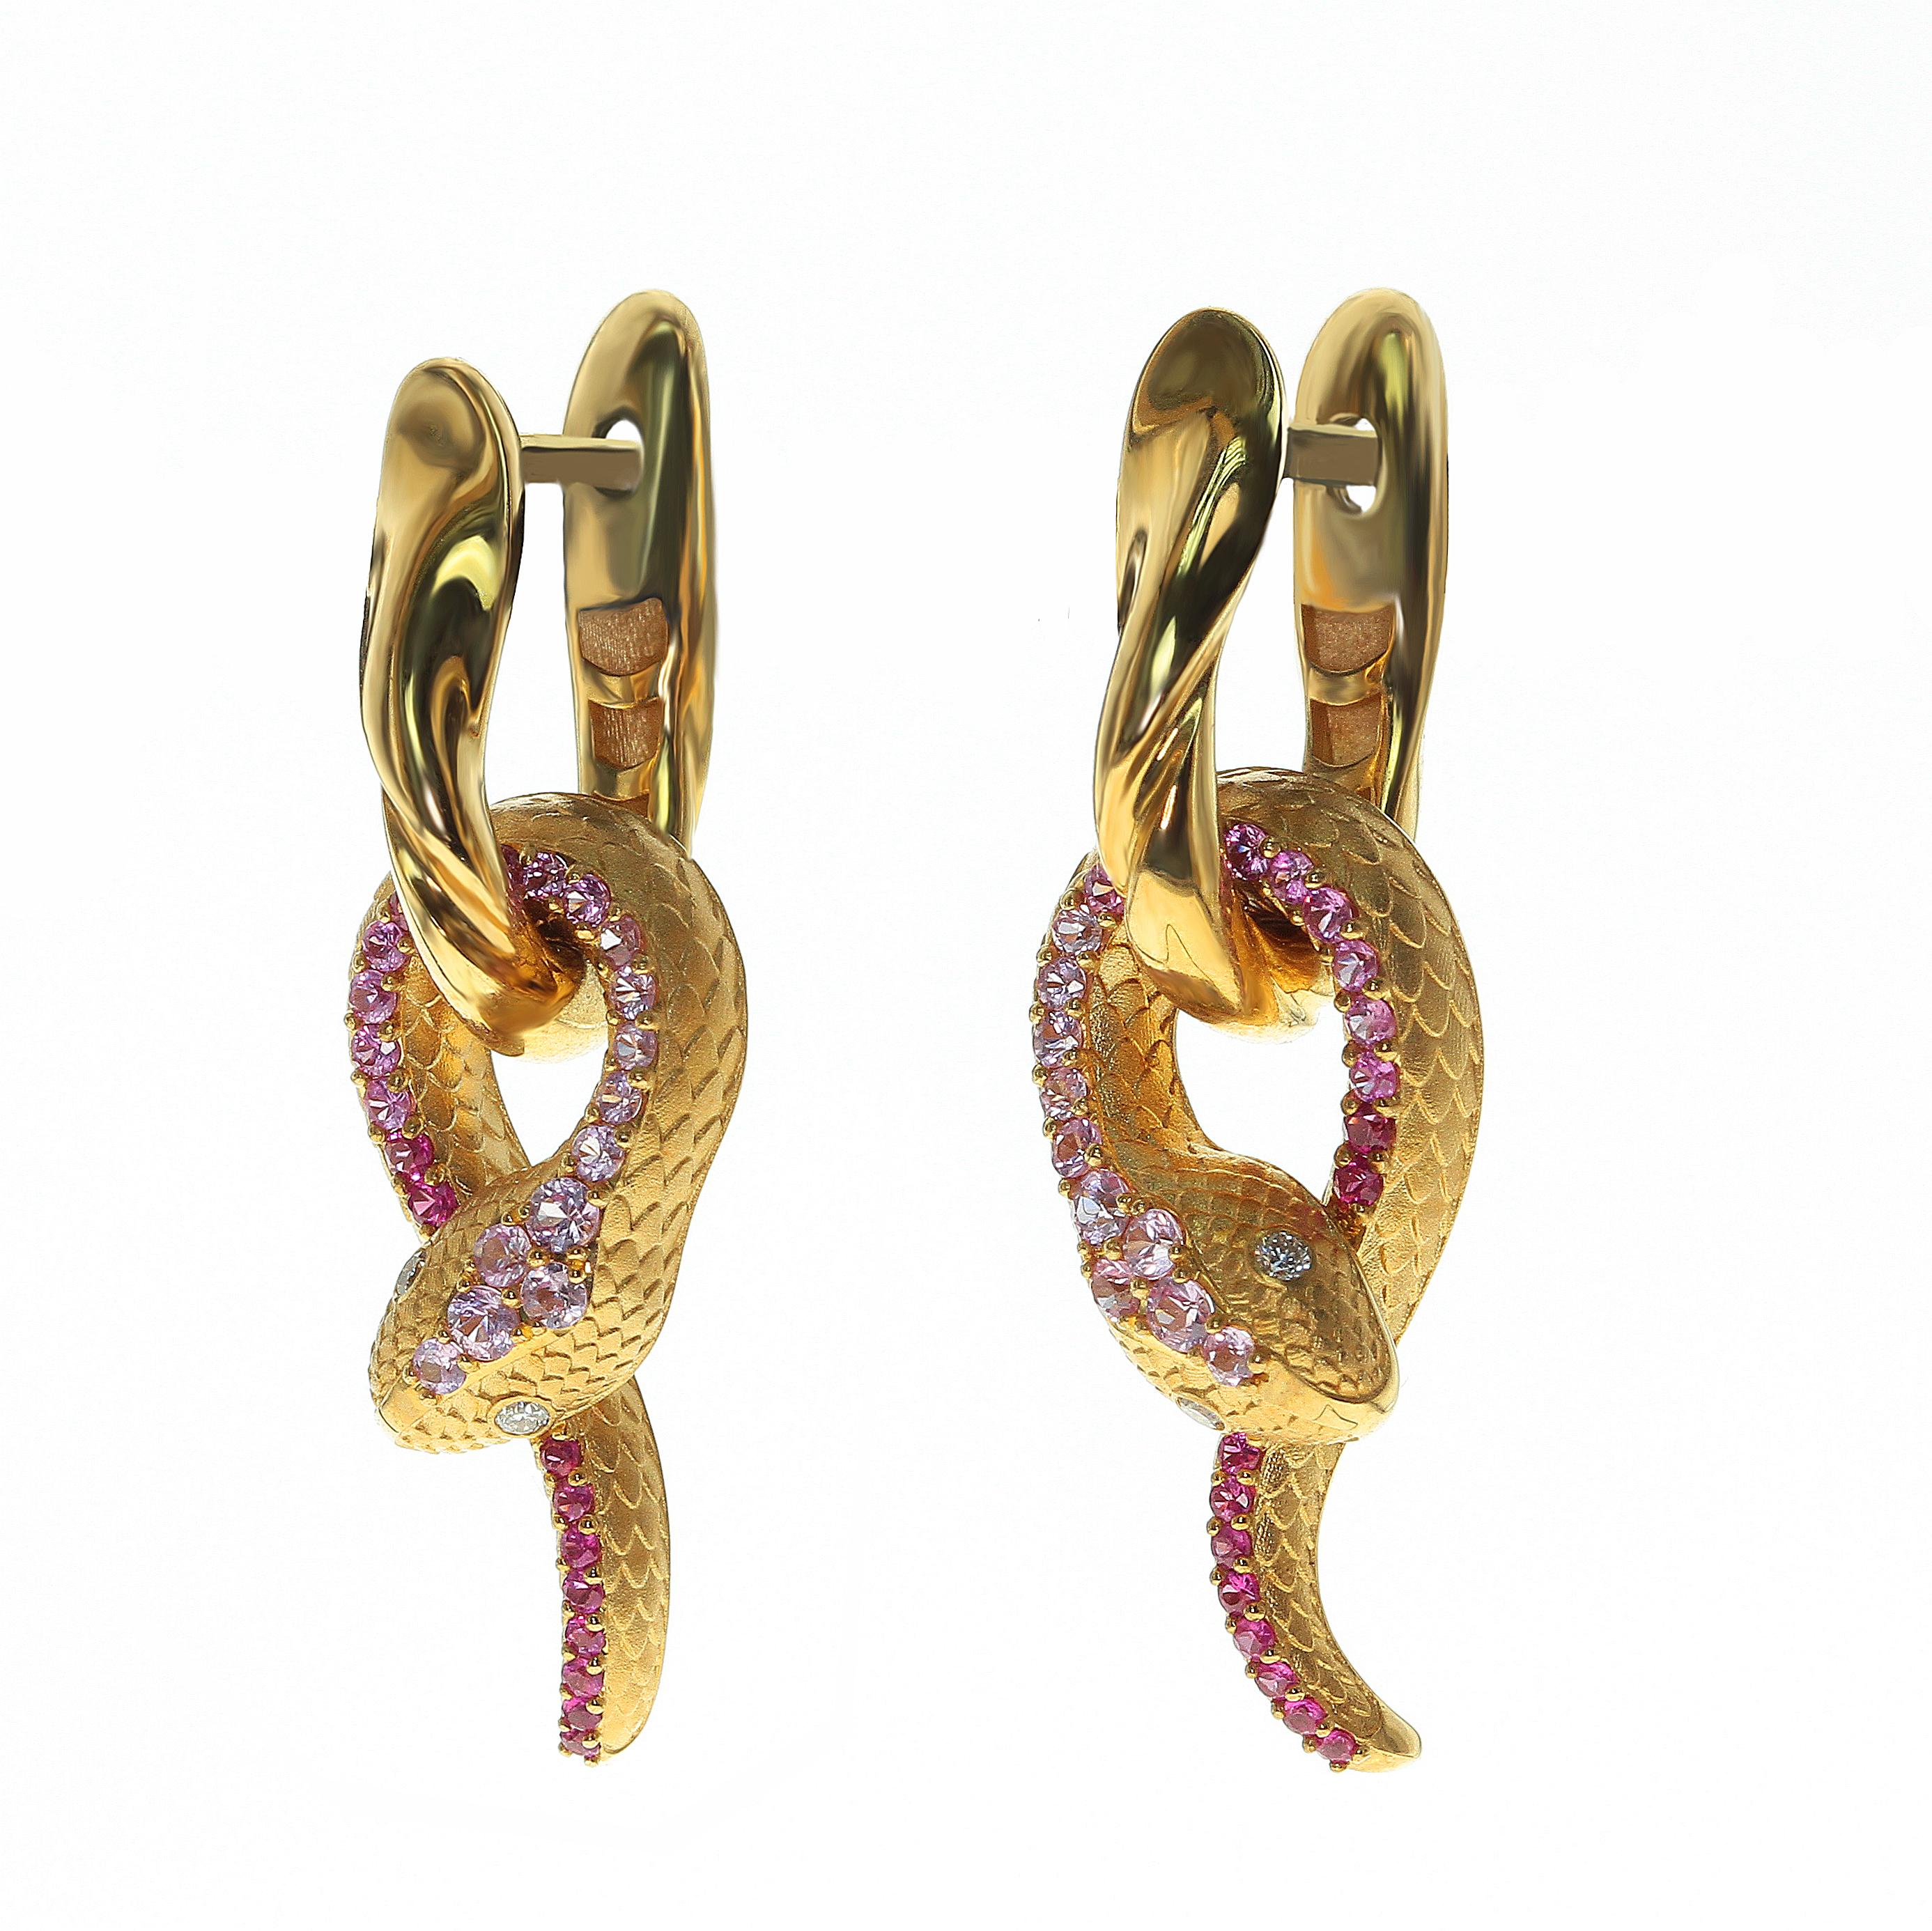 Pink Sapphire Diamonds 18 Karat Yellow Gold Snake Earrings.

Just take a look on this hi-detailed Earrings, distributes all the wisdom of the Snake. Carefully selected color graduation from Pink Sapphires to Diamonds gives the impression that Snake